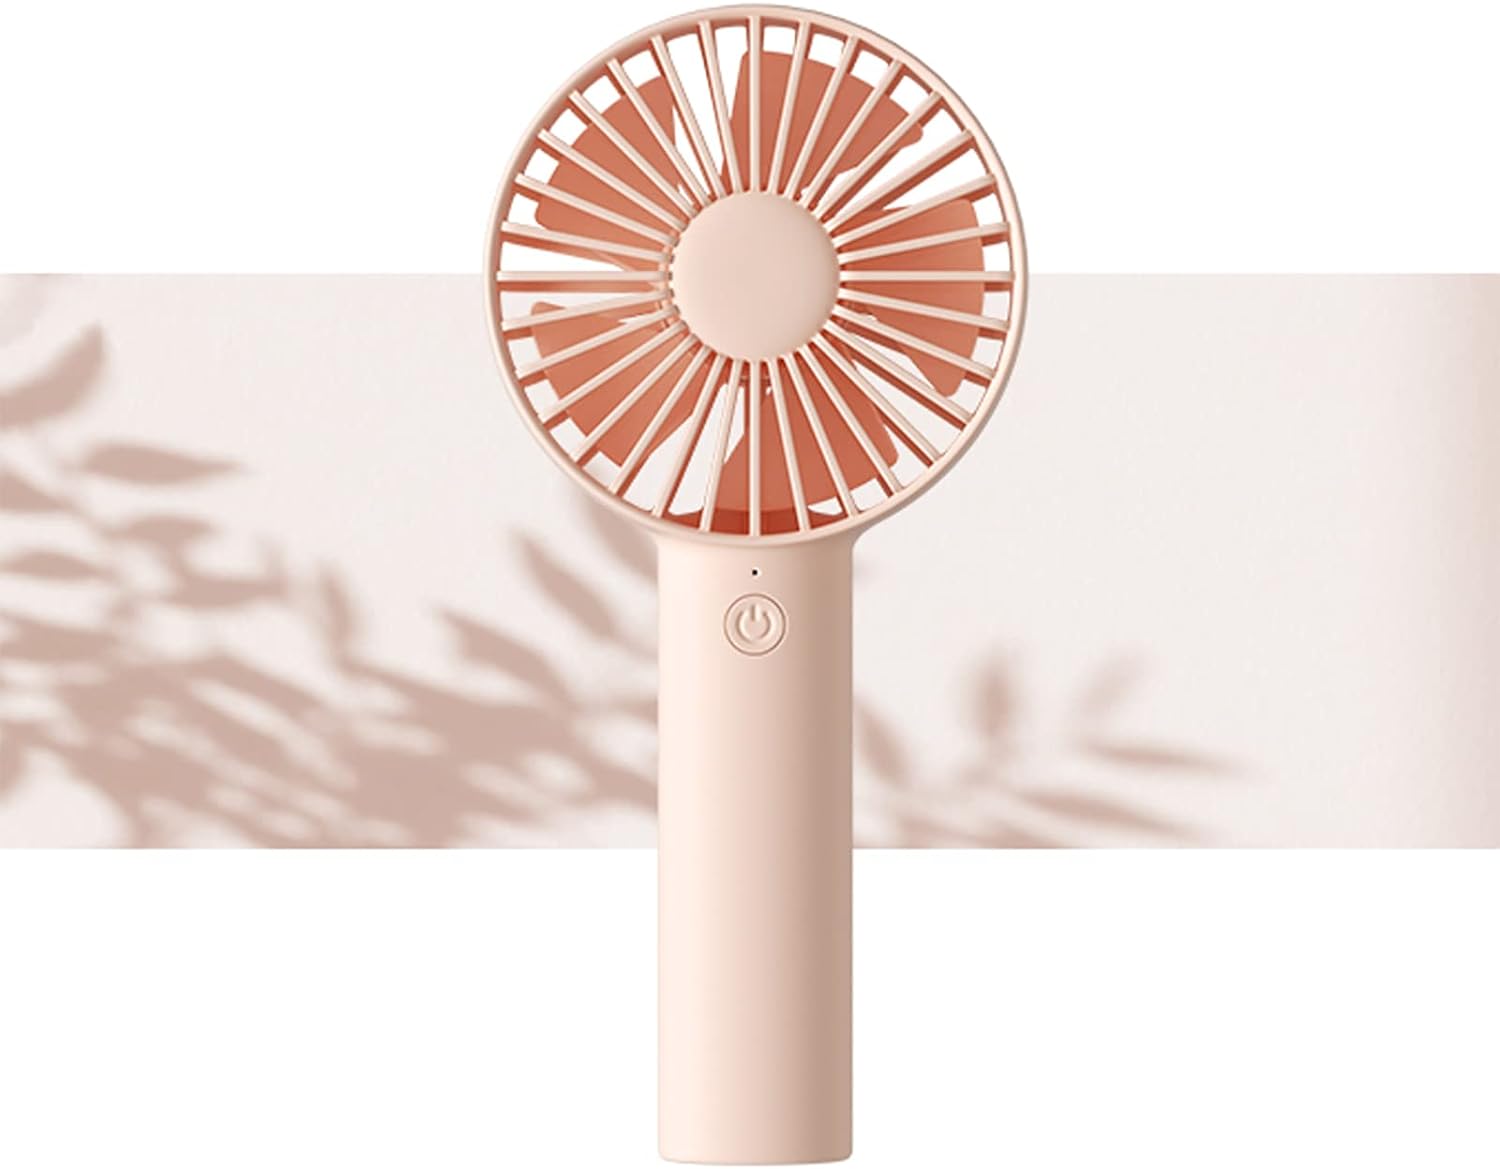 JISULIFE Handheld Fan, Portable Small Fan with 3 Speeds, USB Rechargeable Hand Fan, Personal Fan Battery Operate for Outdoor, Indoor, Commute, Office, Travel -Pink